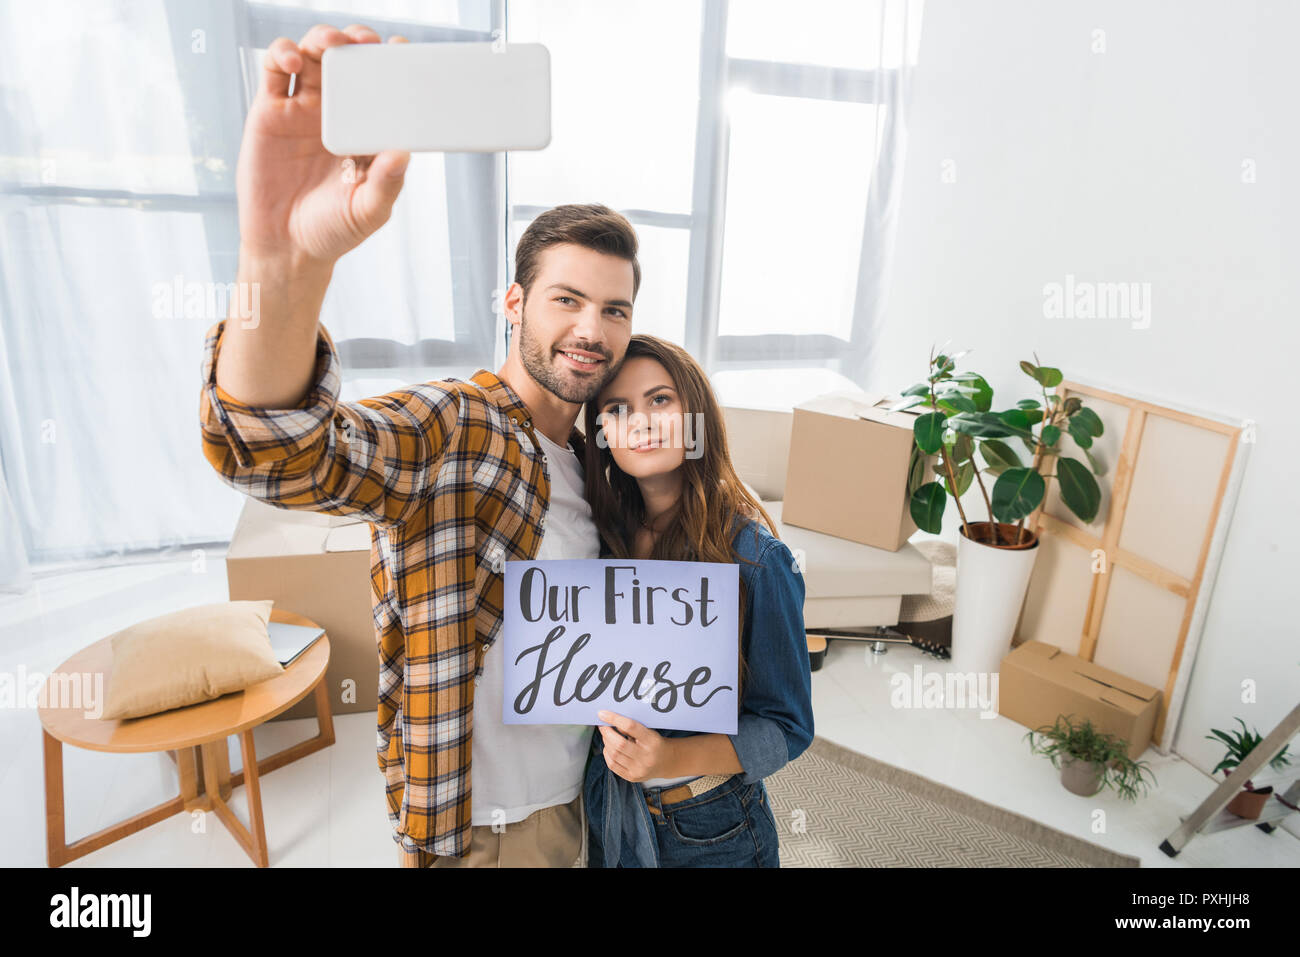 portrait of young couple with our first house card taking selfie on smartphone, moving home concept Stock Photo